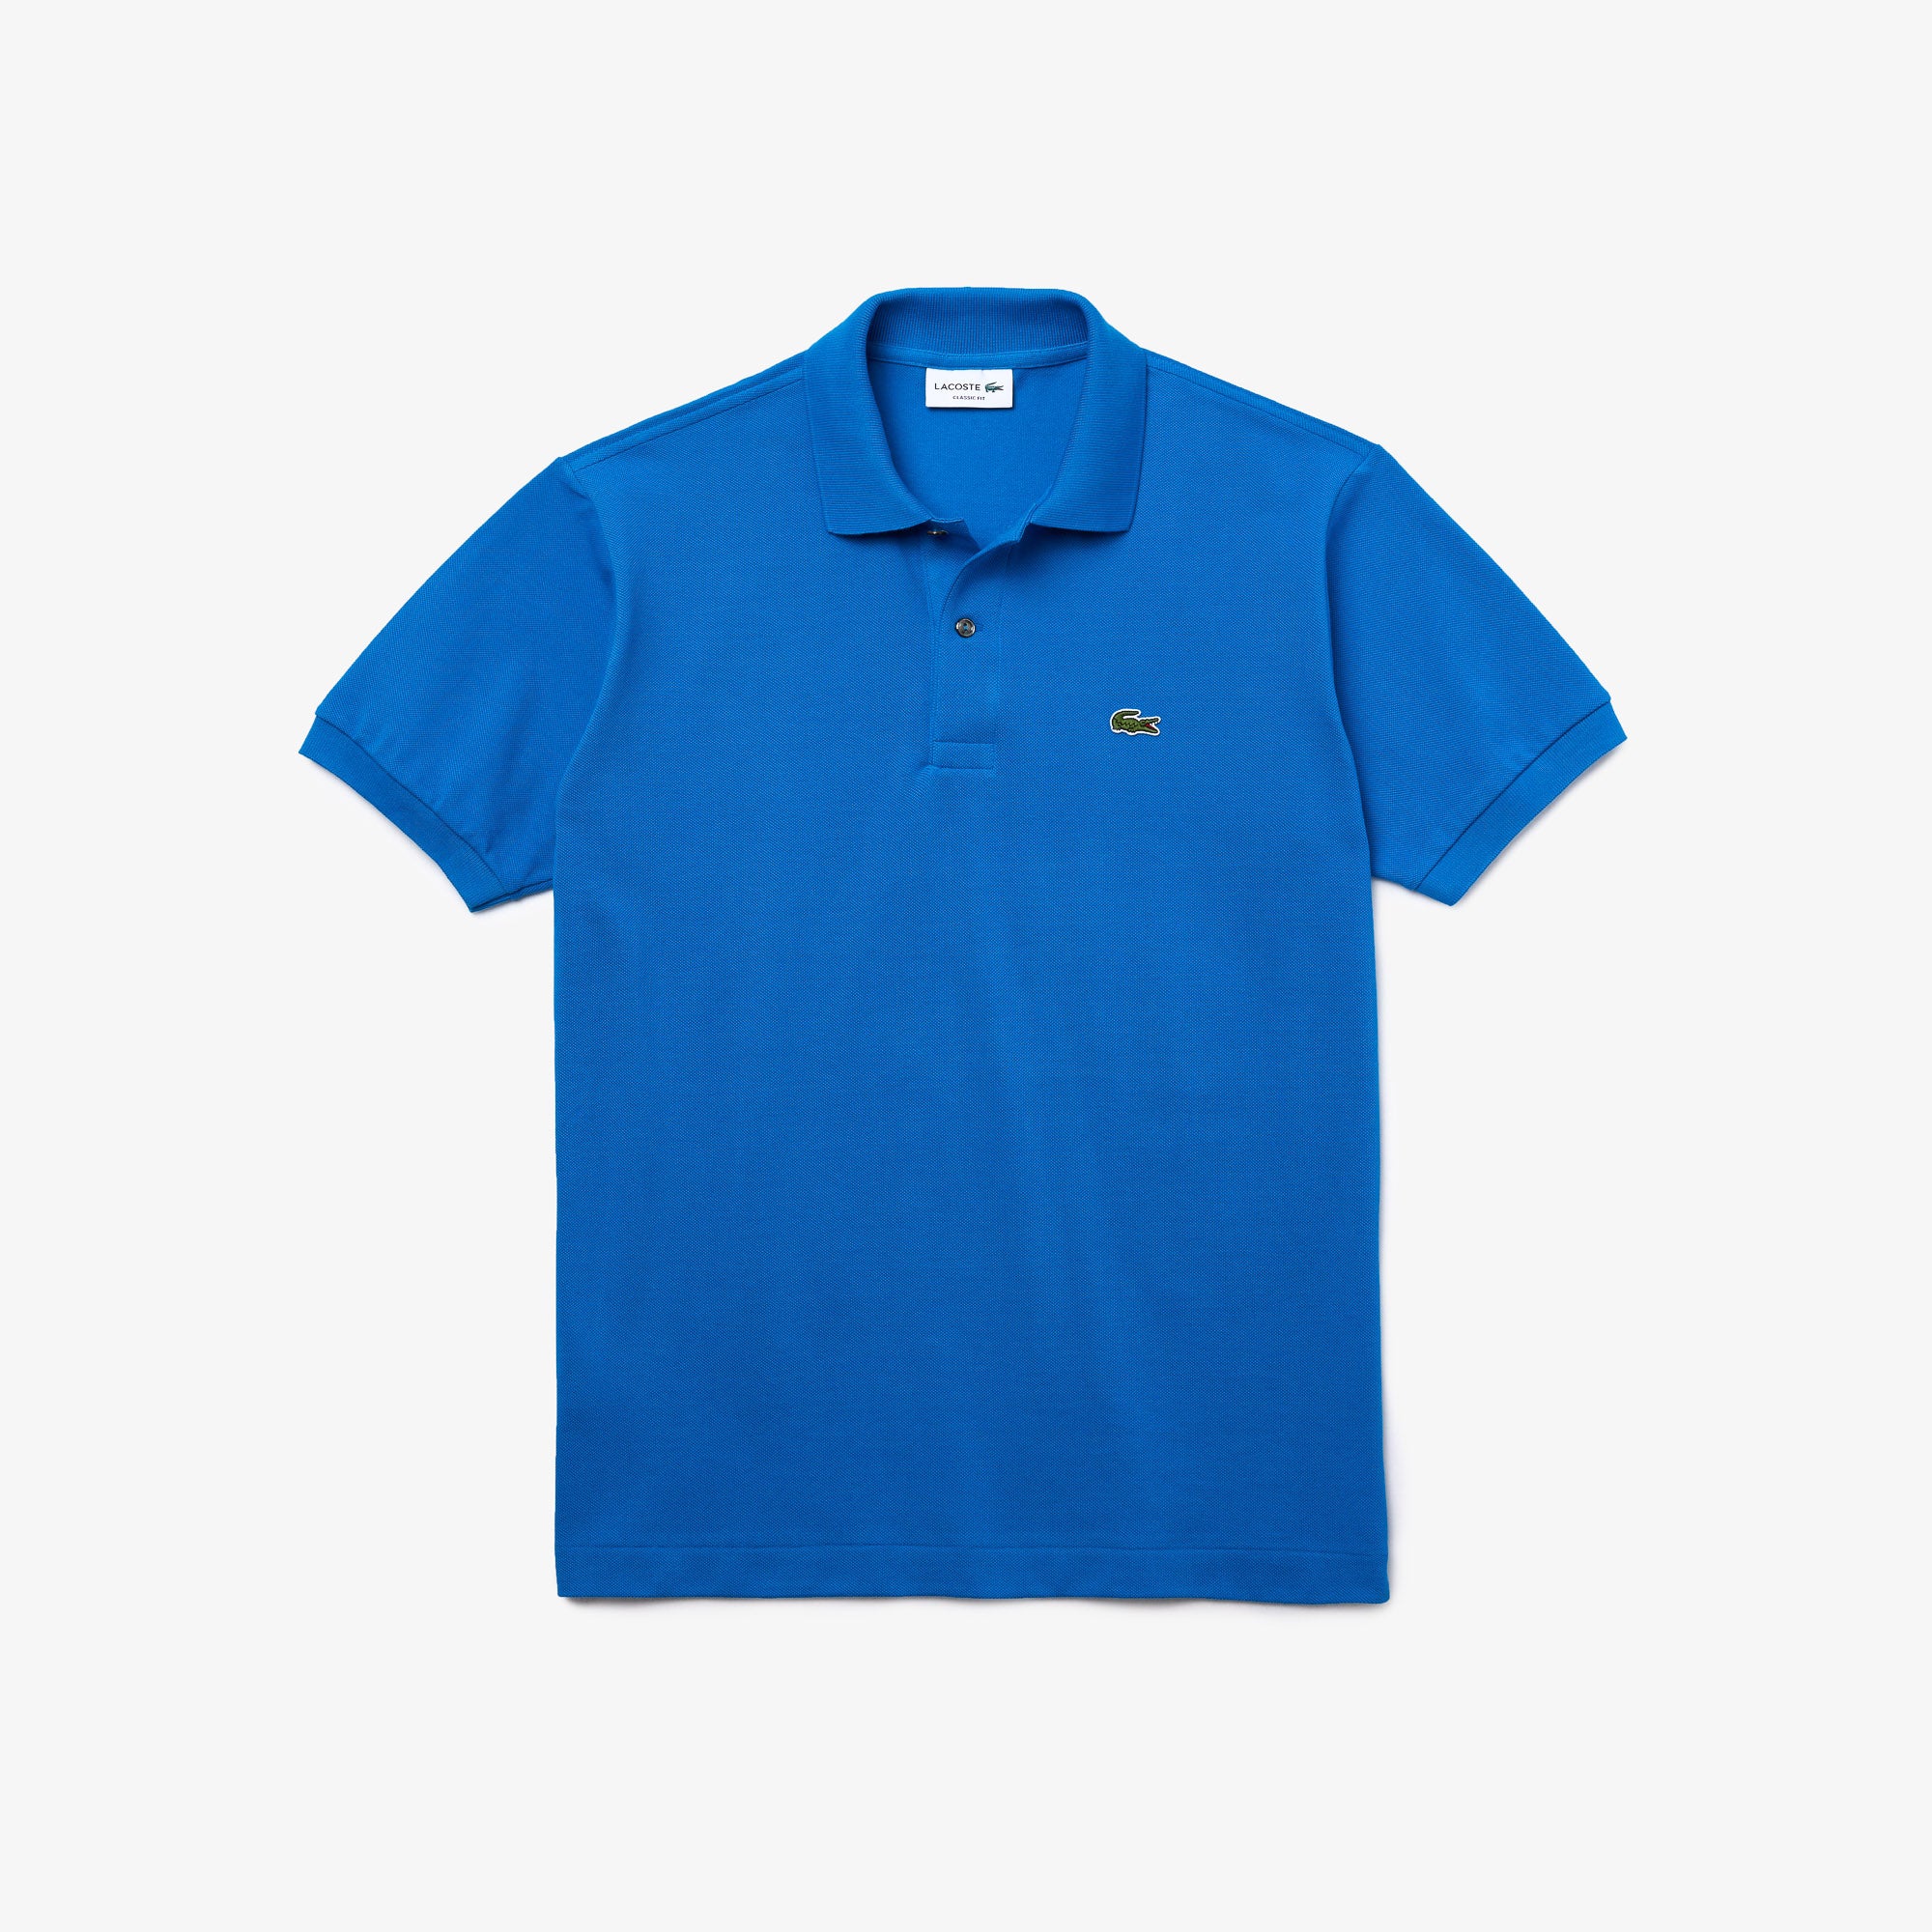 Lacoste L.12.12 Polo Shirt – Lacoste Philippines